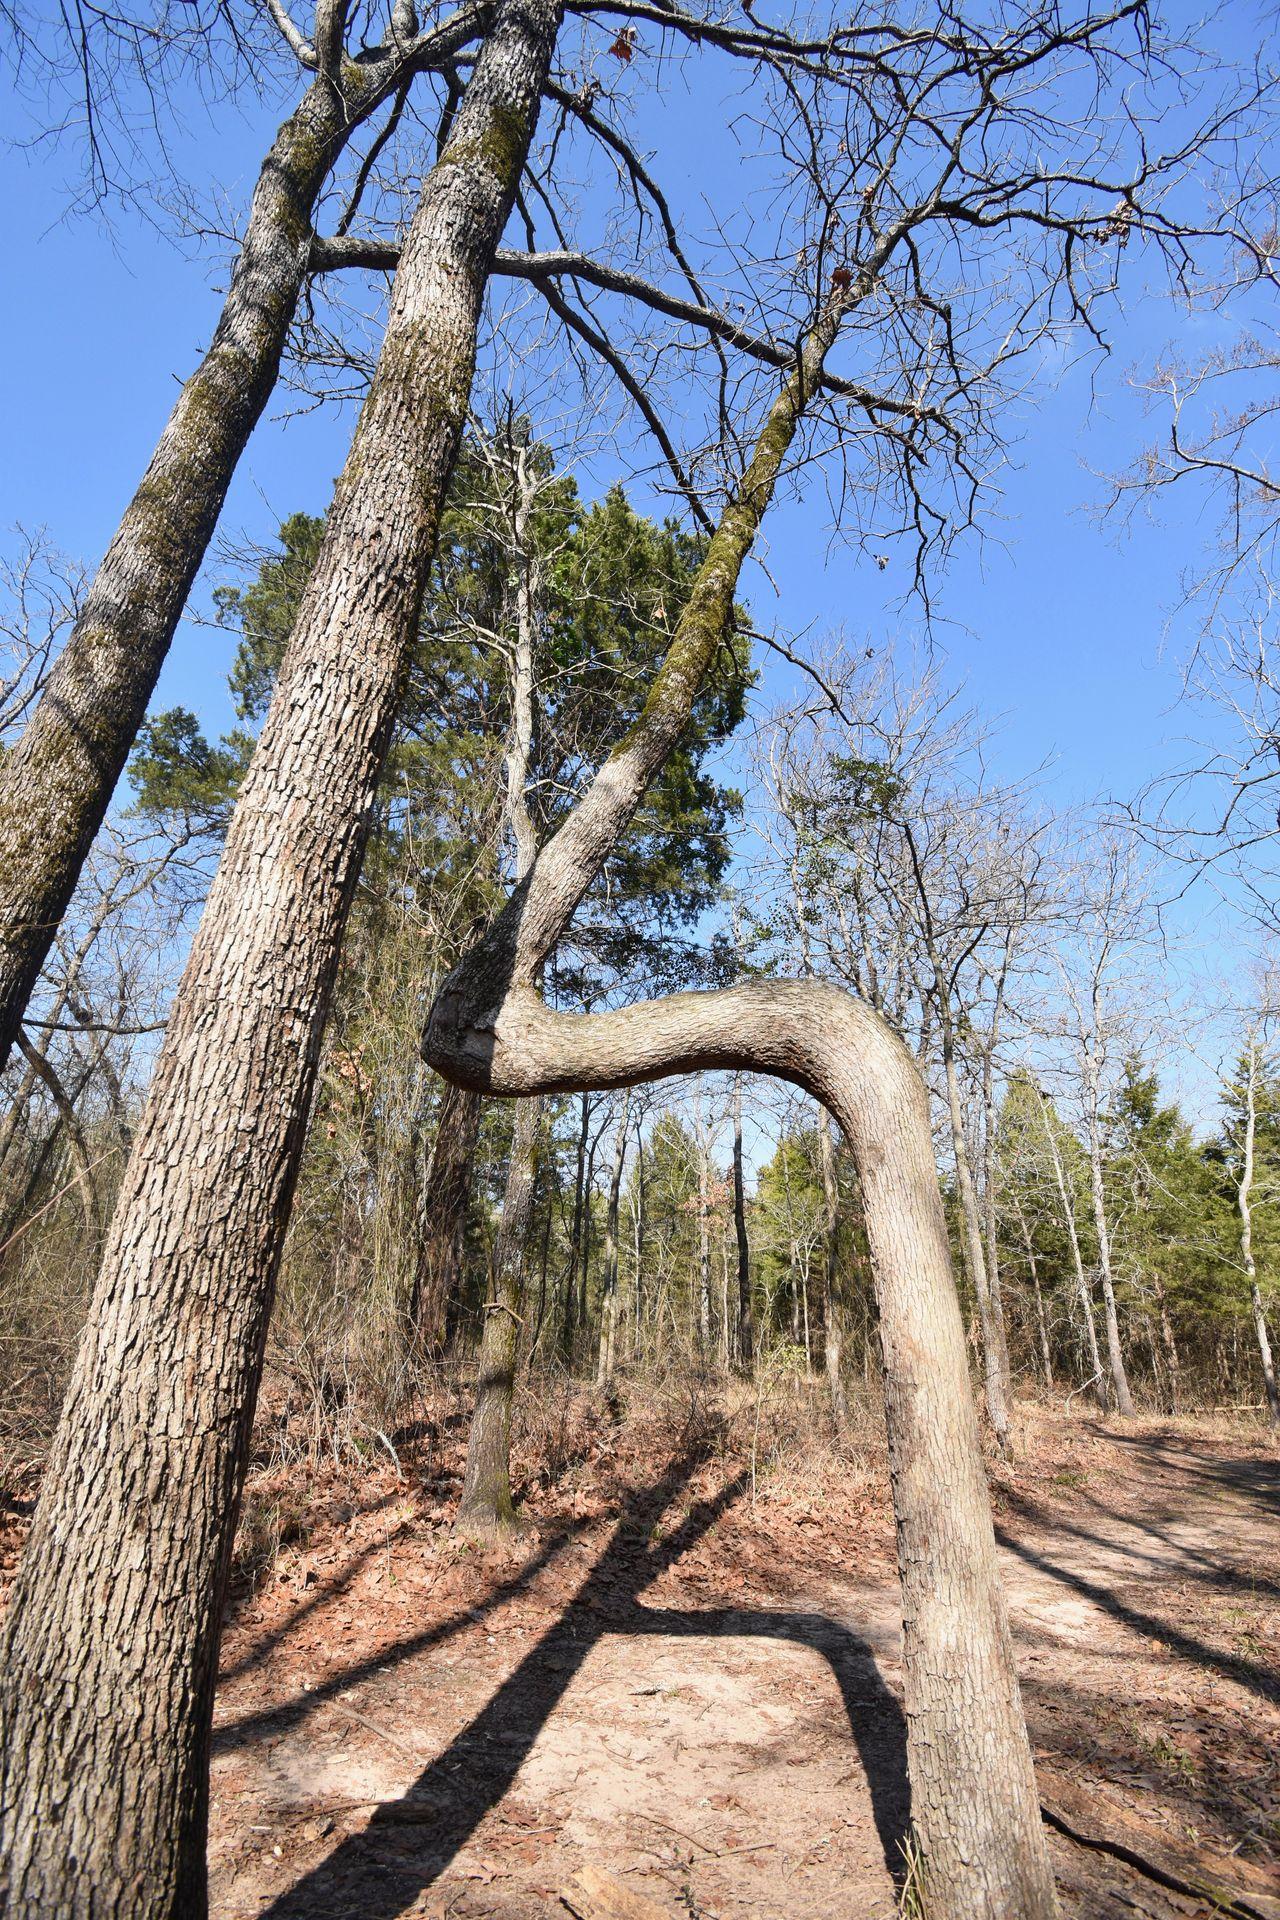 A tree that is bent in a seemingly right angle in the middle of it's growth.